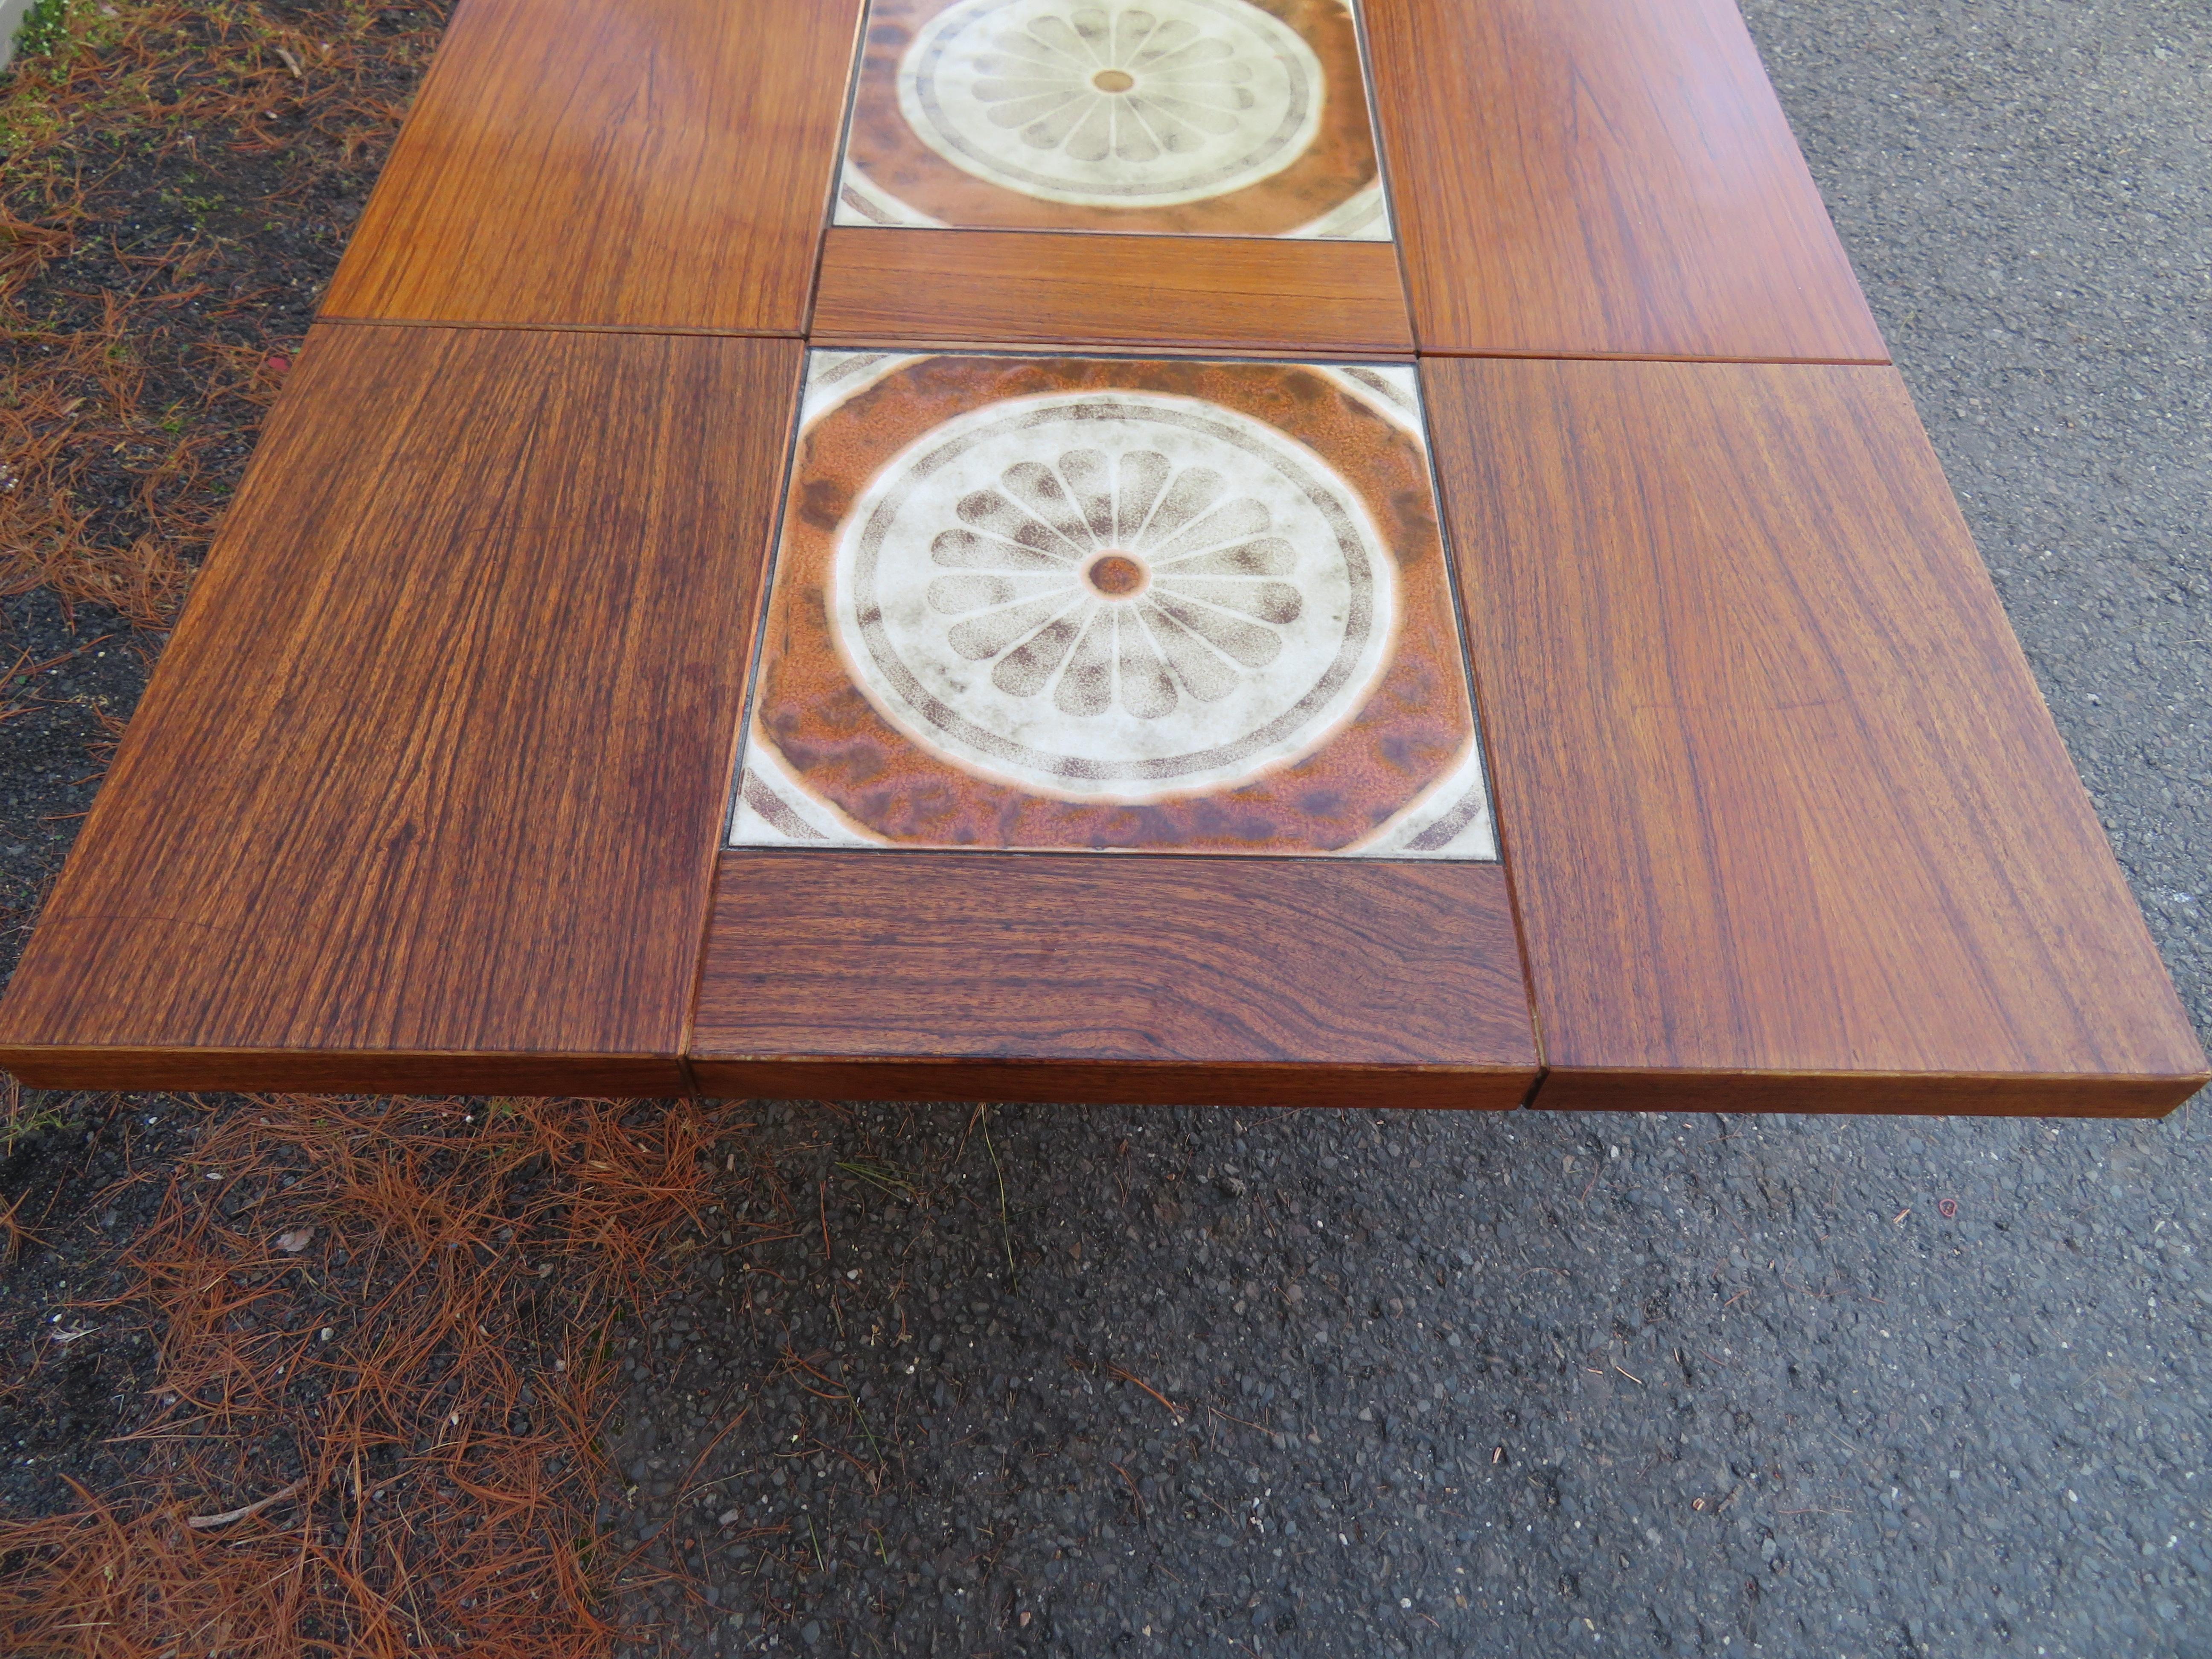 1970s Ox Art Danish Rosewood Tile Drop Leaf Dining Table Midcentury In Good Condition For Sale In Pemberton, NJ